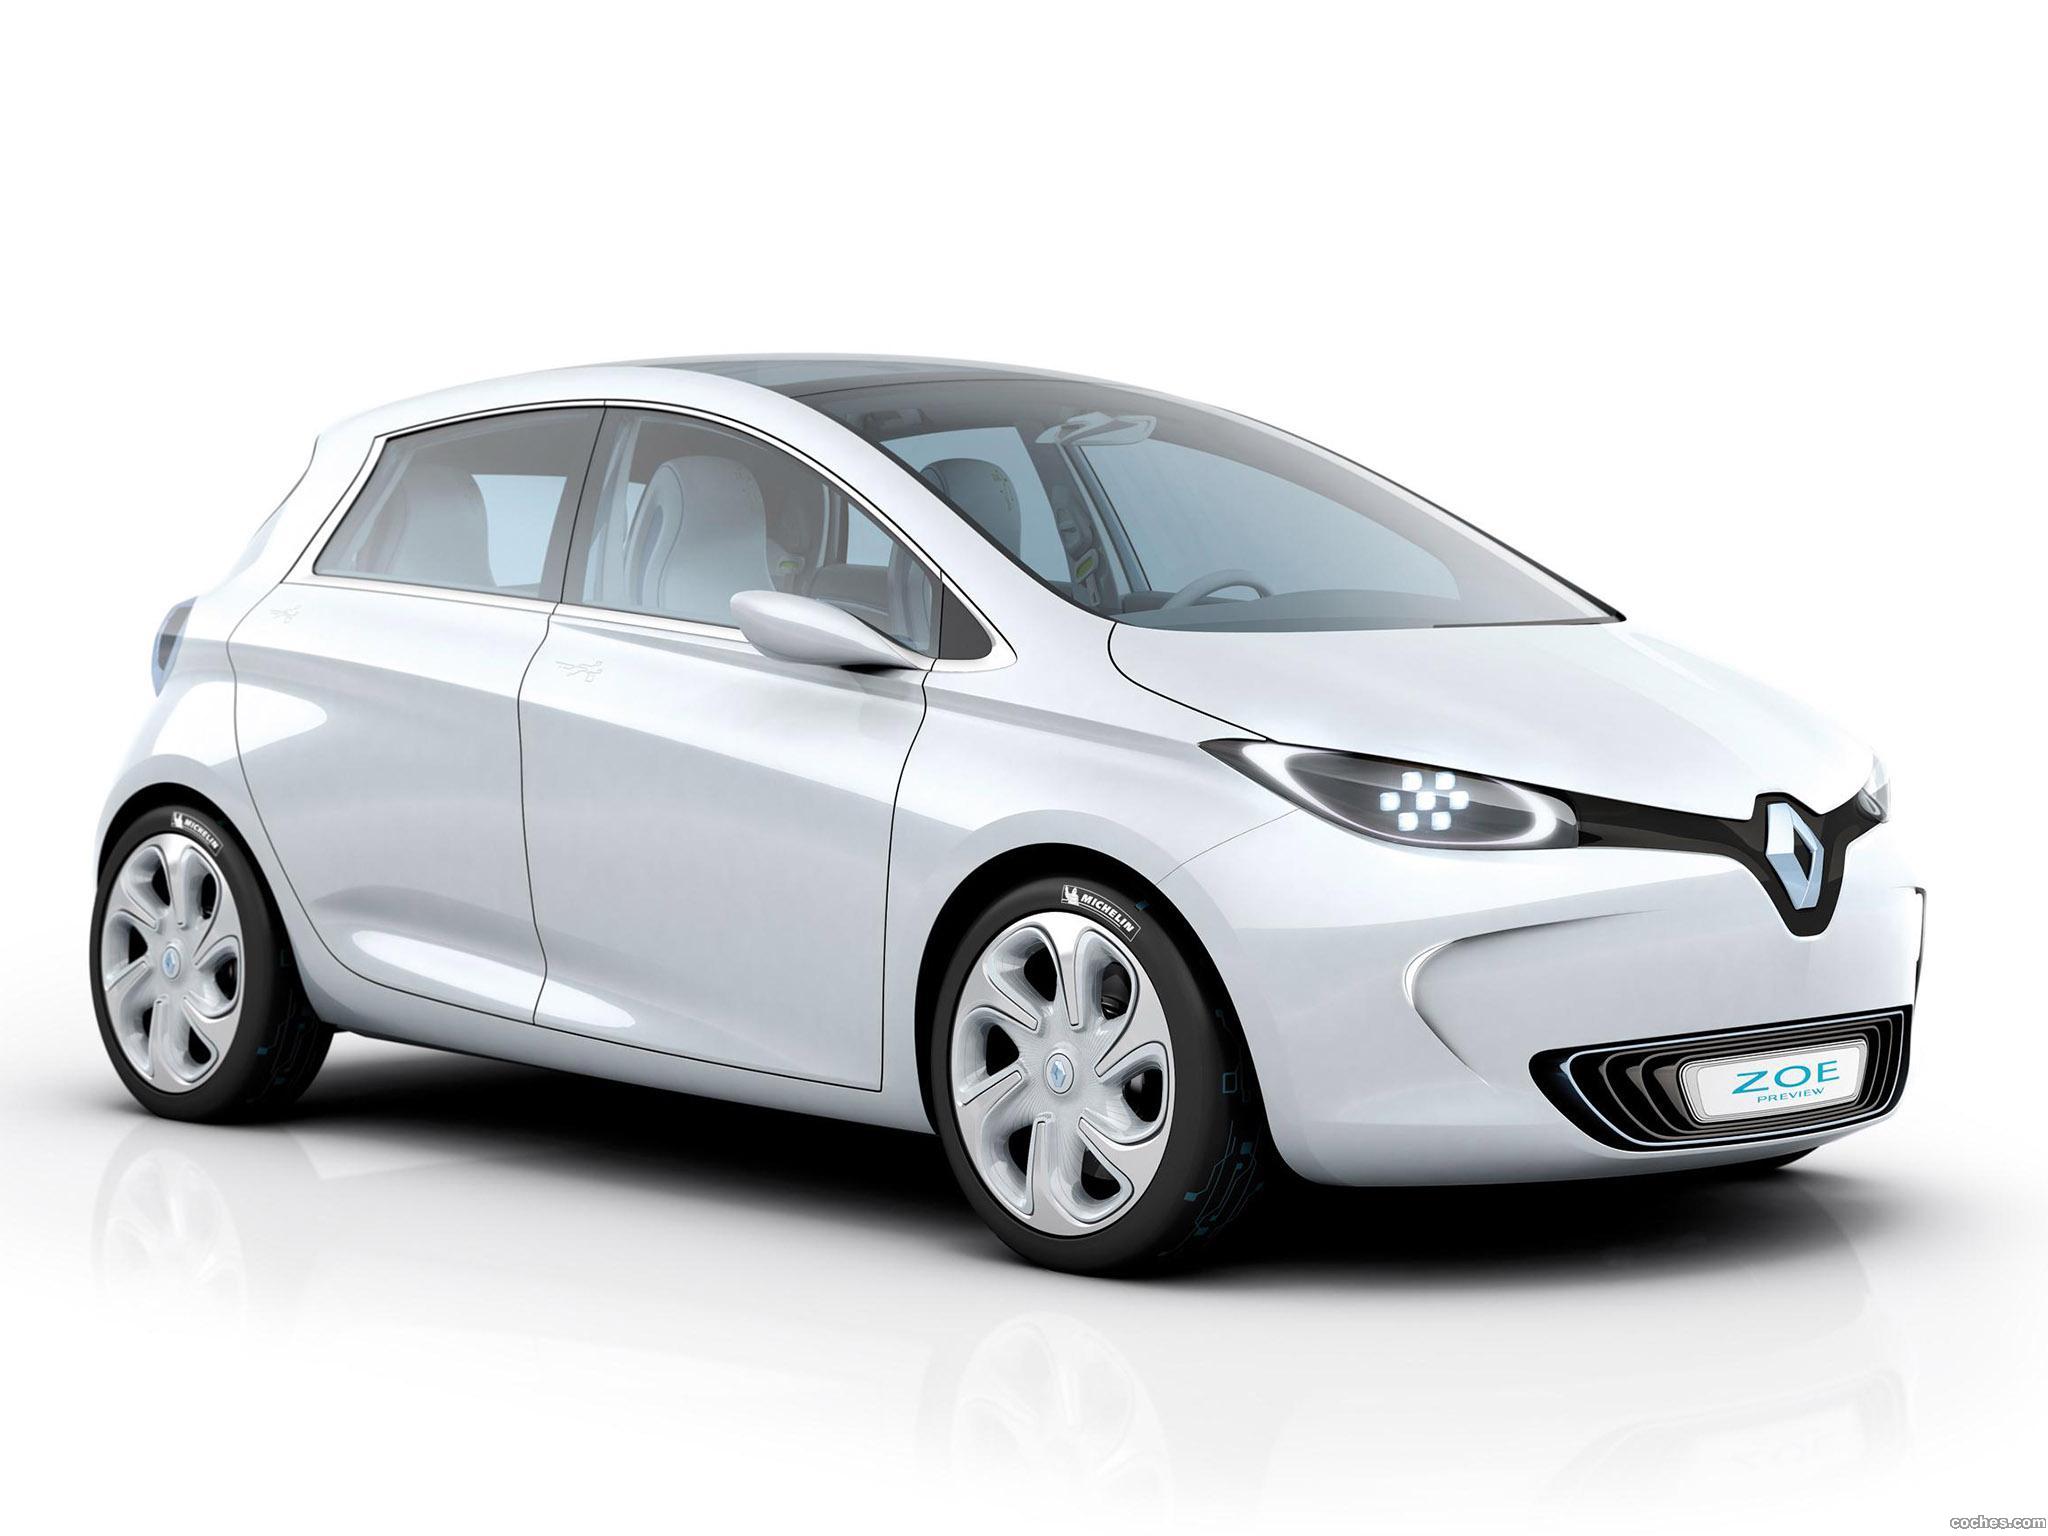 renault_zoe-preview-2010_r11